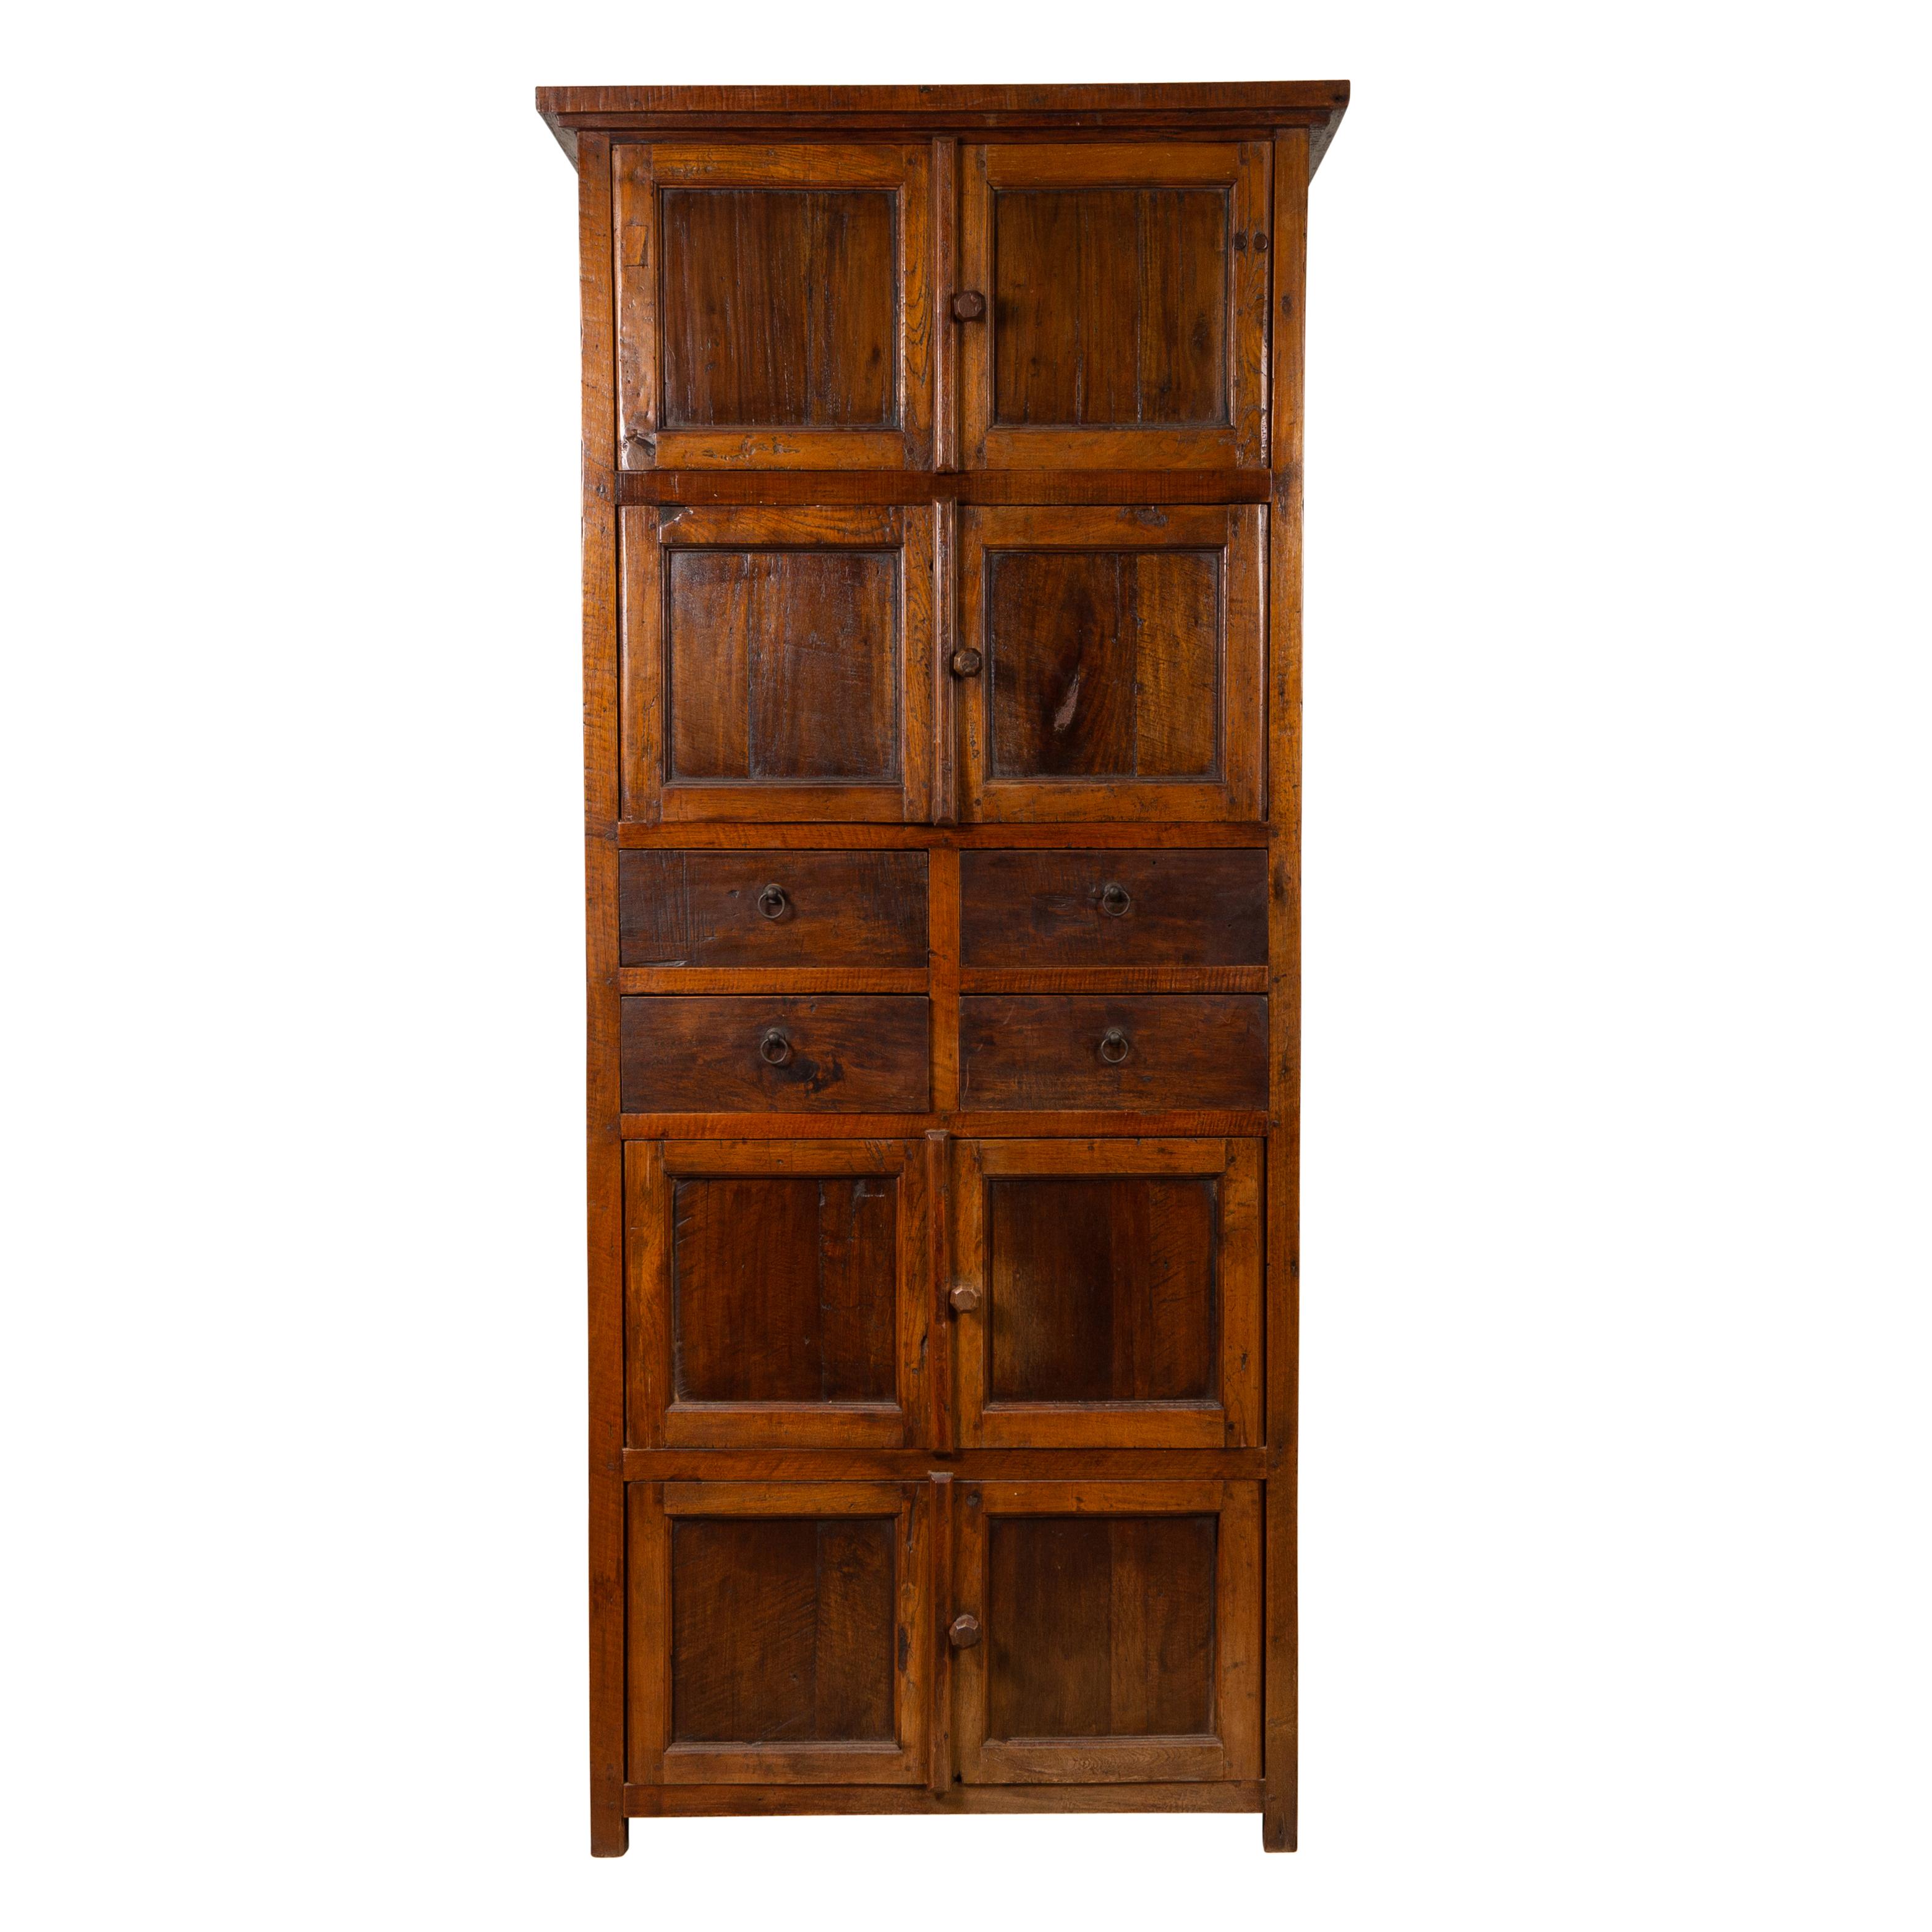 Tall Antique Javanese Teak Wood Cabinet with Four Double Doors and Drawers